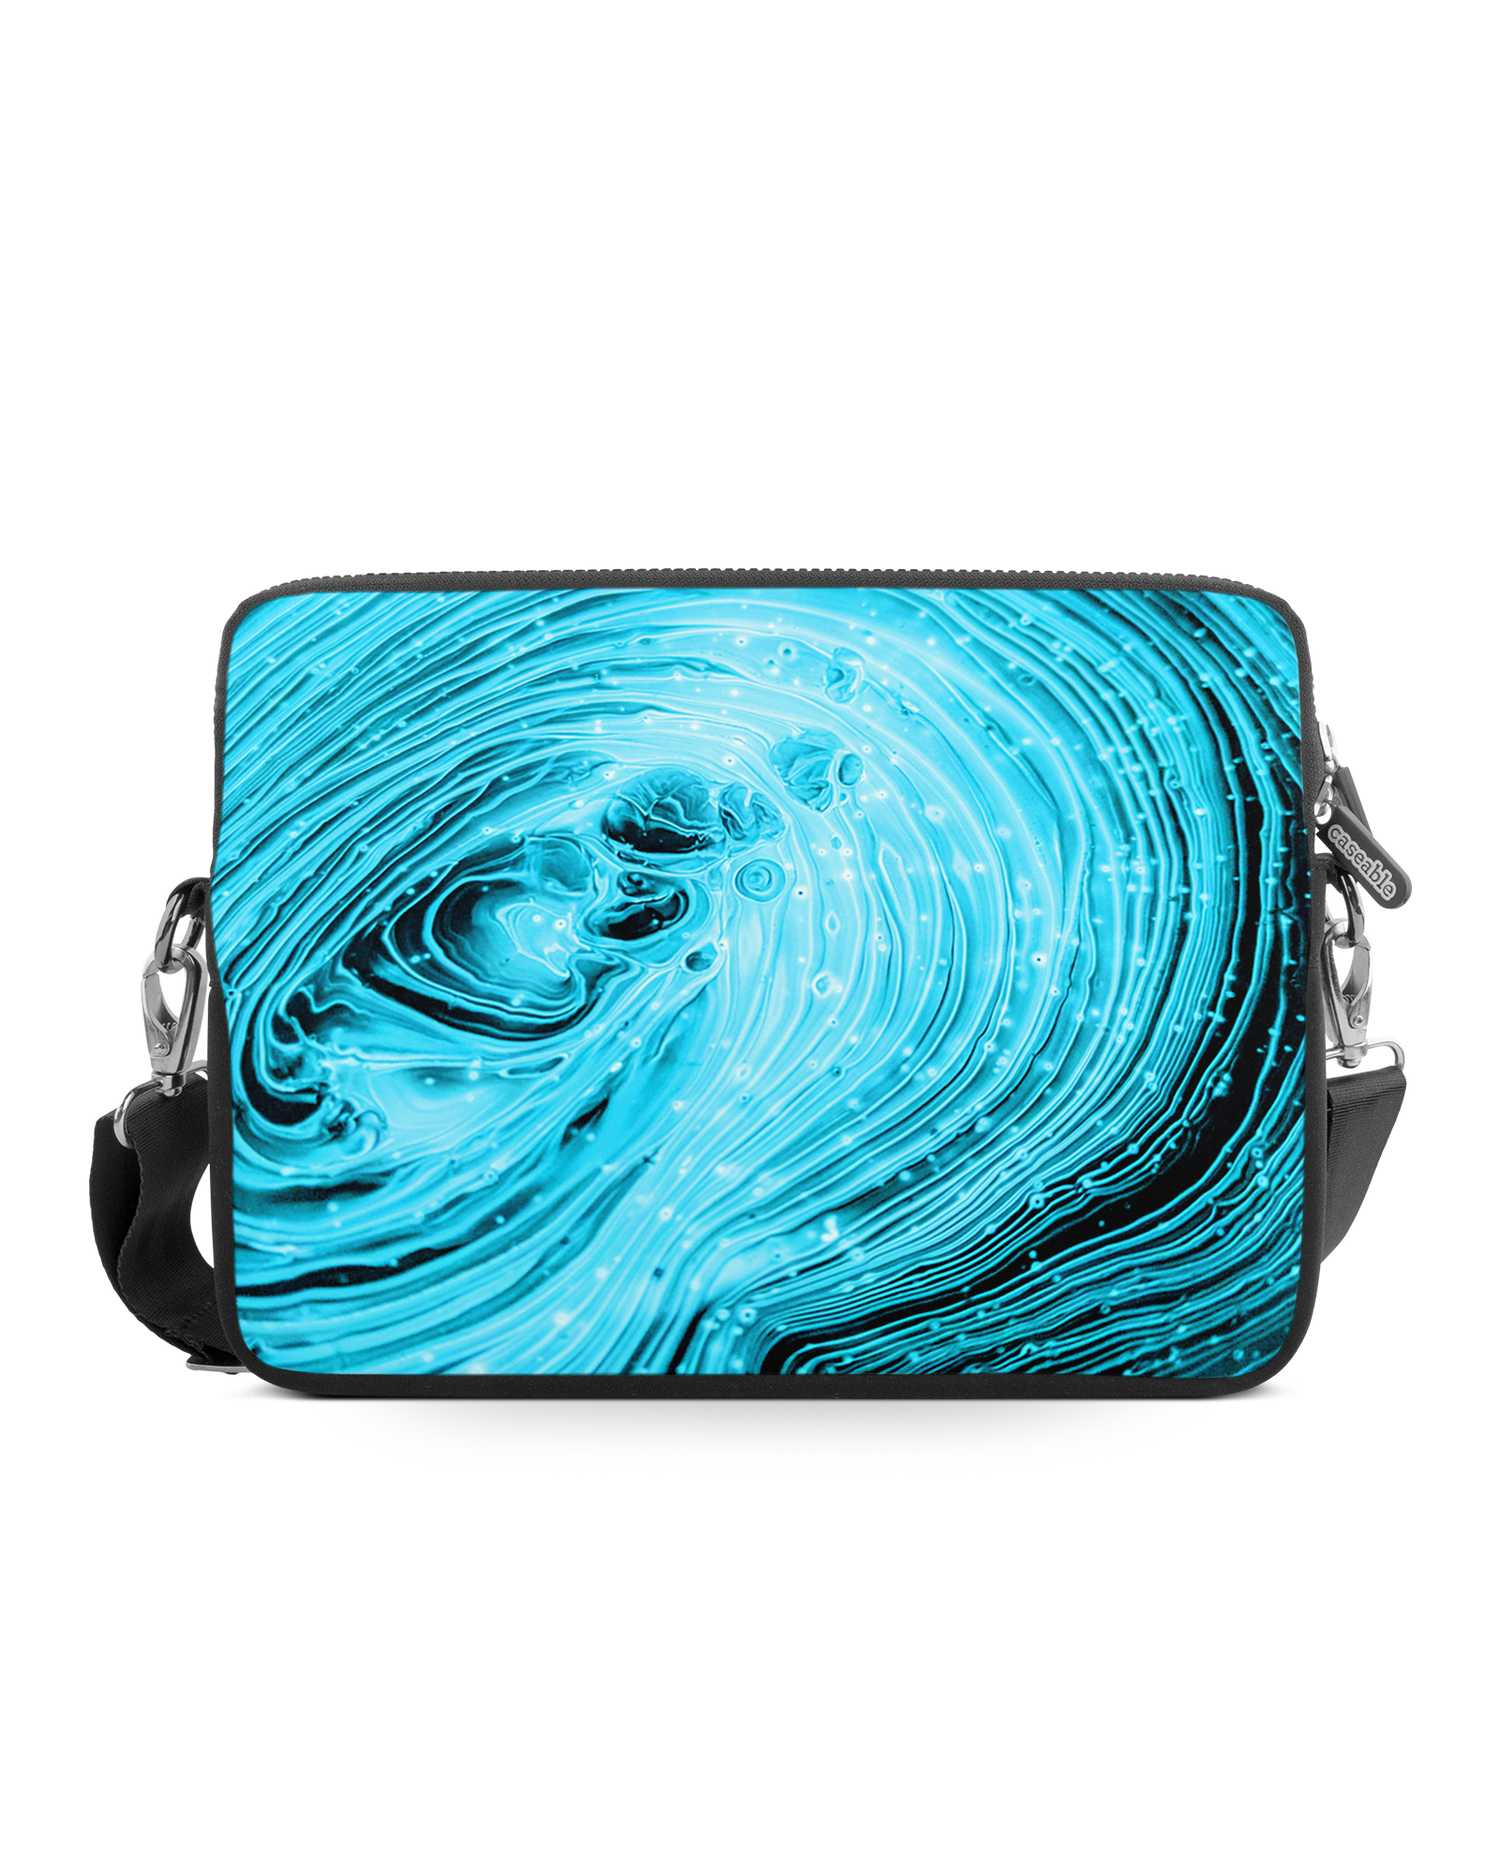 Turquoise Ripples Premium Laptop Bag 15 inch: Front View